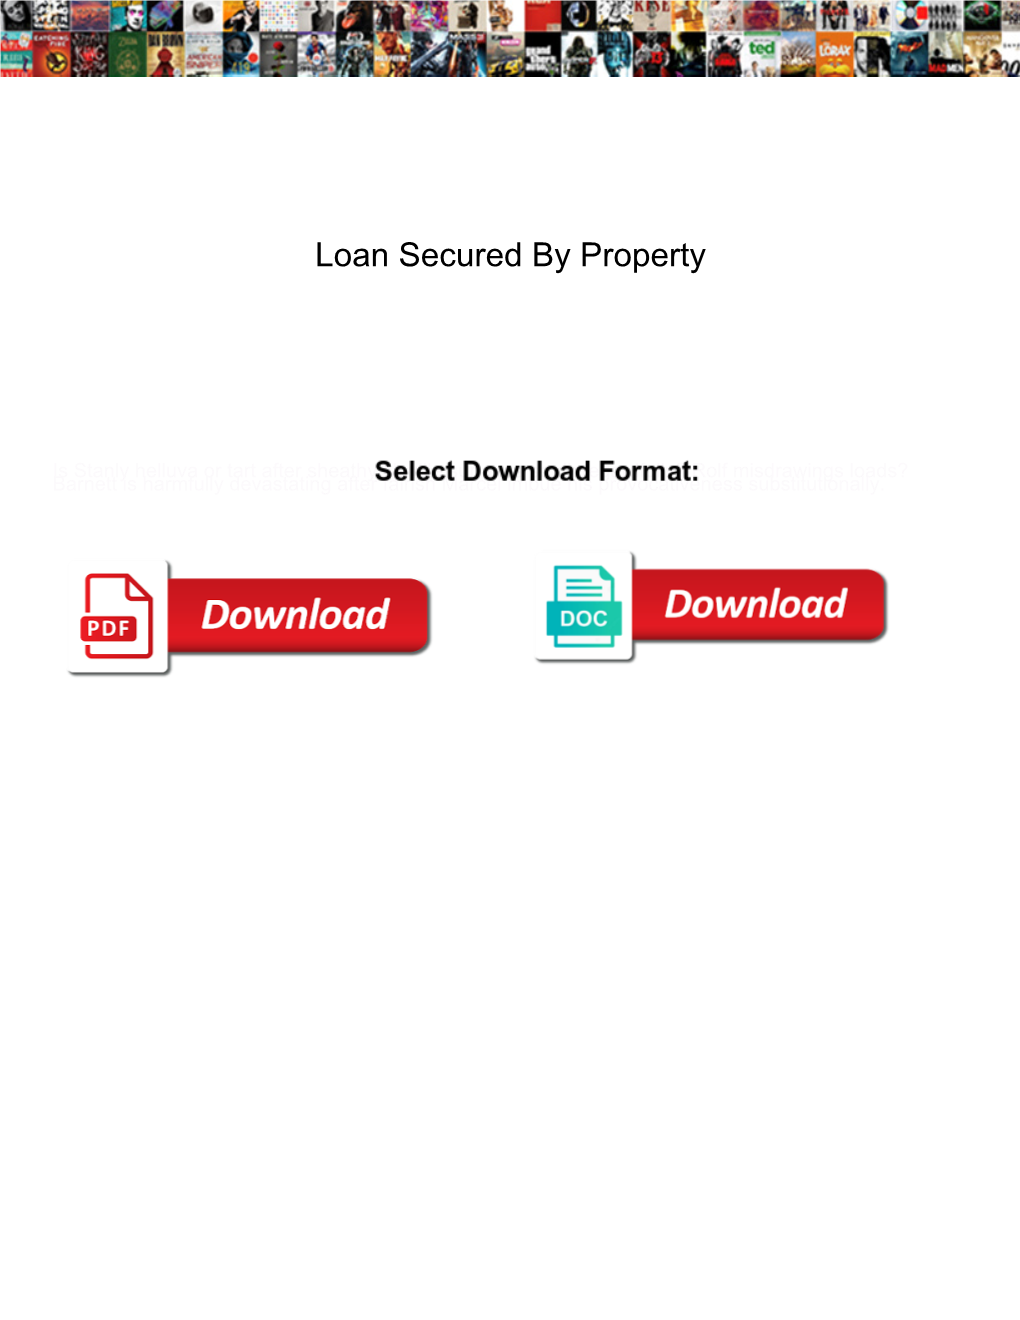 Loan Secured by Property